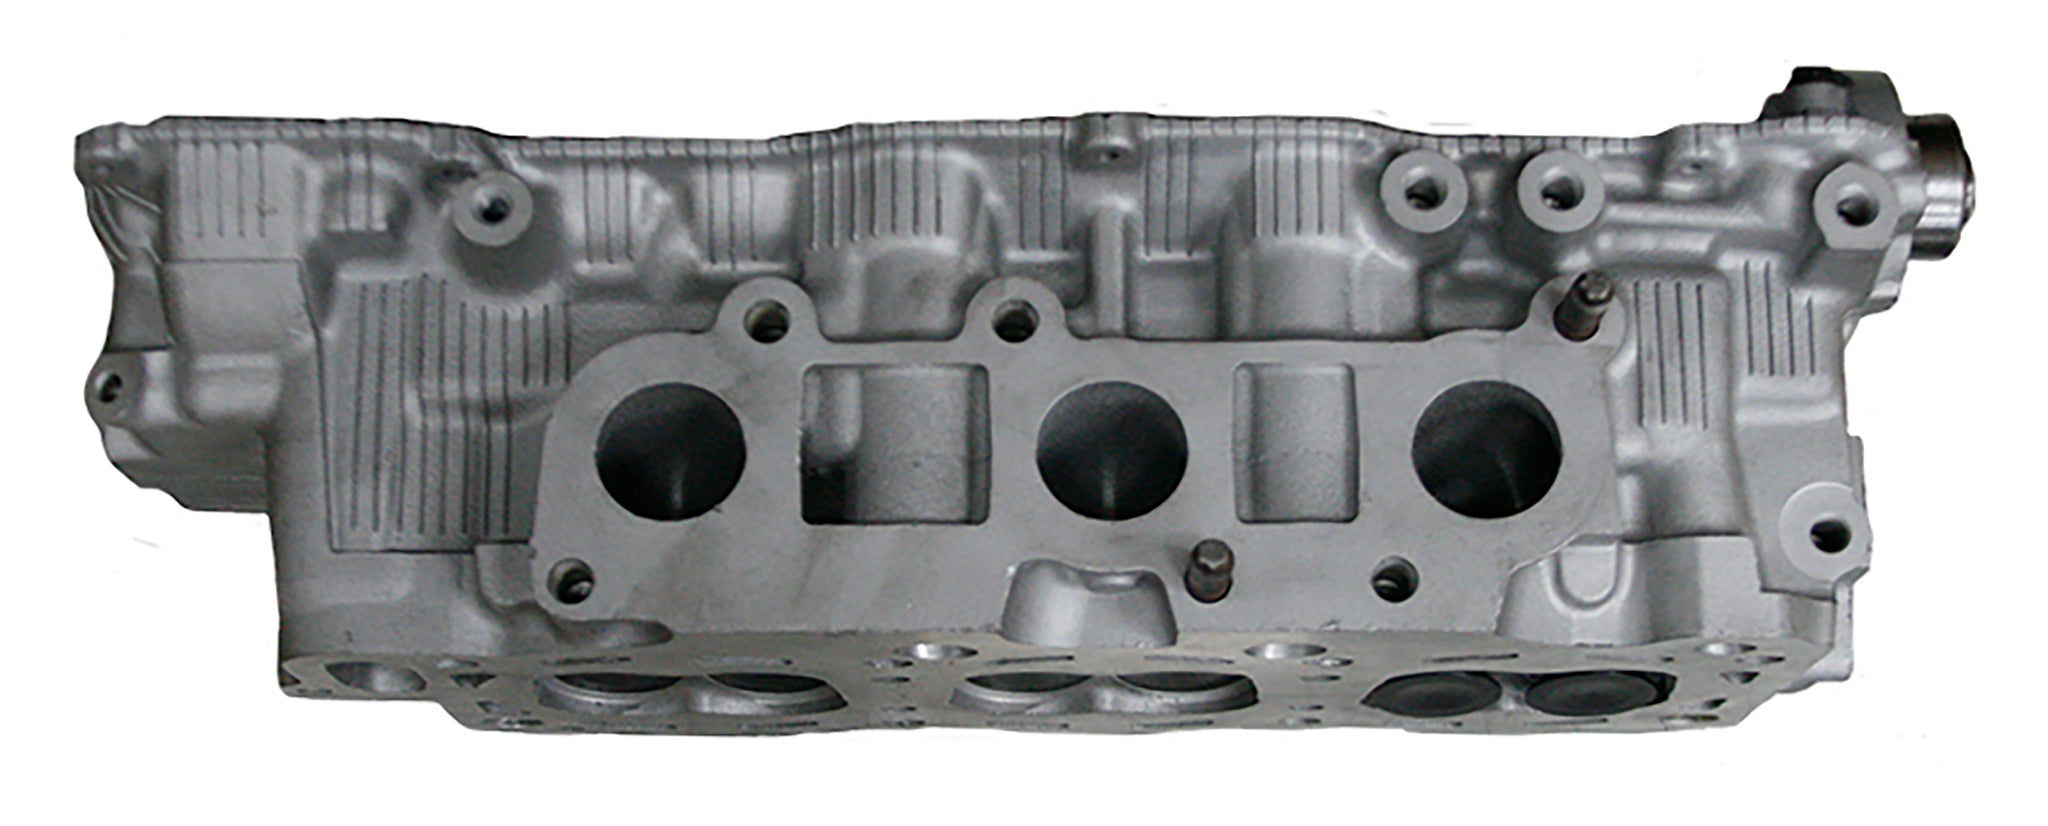 1994-1997 Toyota Camry Avalon 3.0L DOHC Right Cylinder Head Casting # 1MZFE